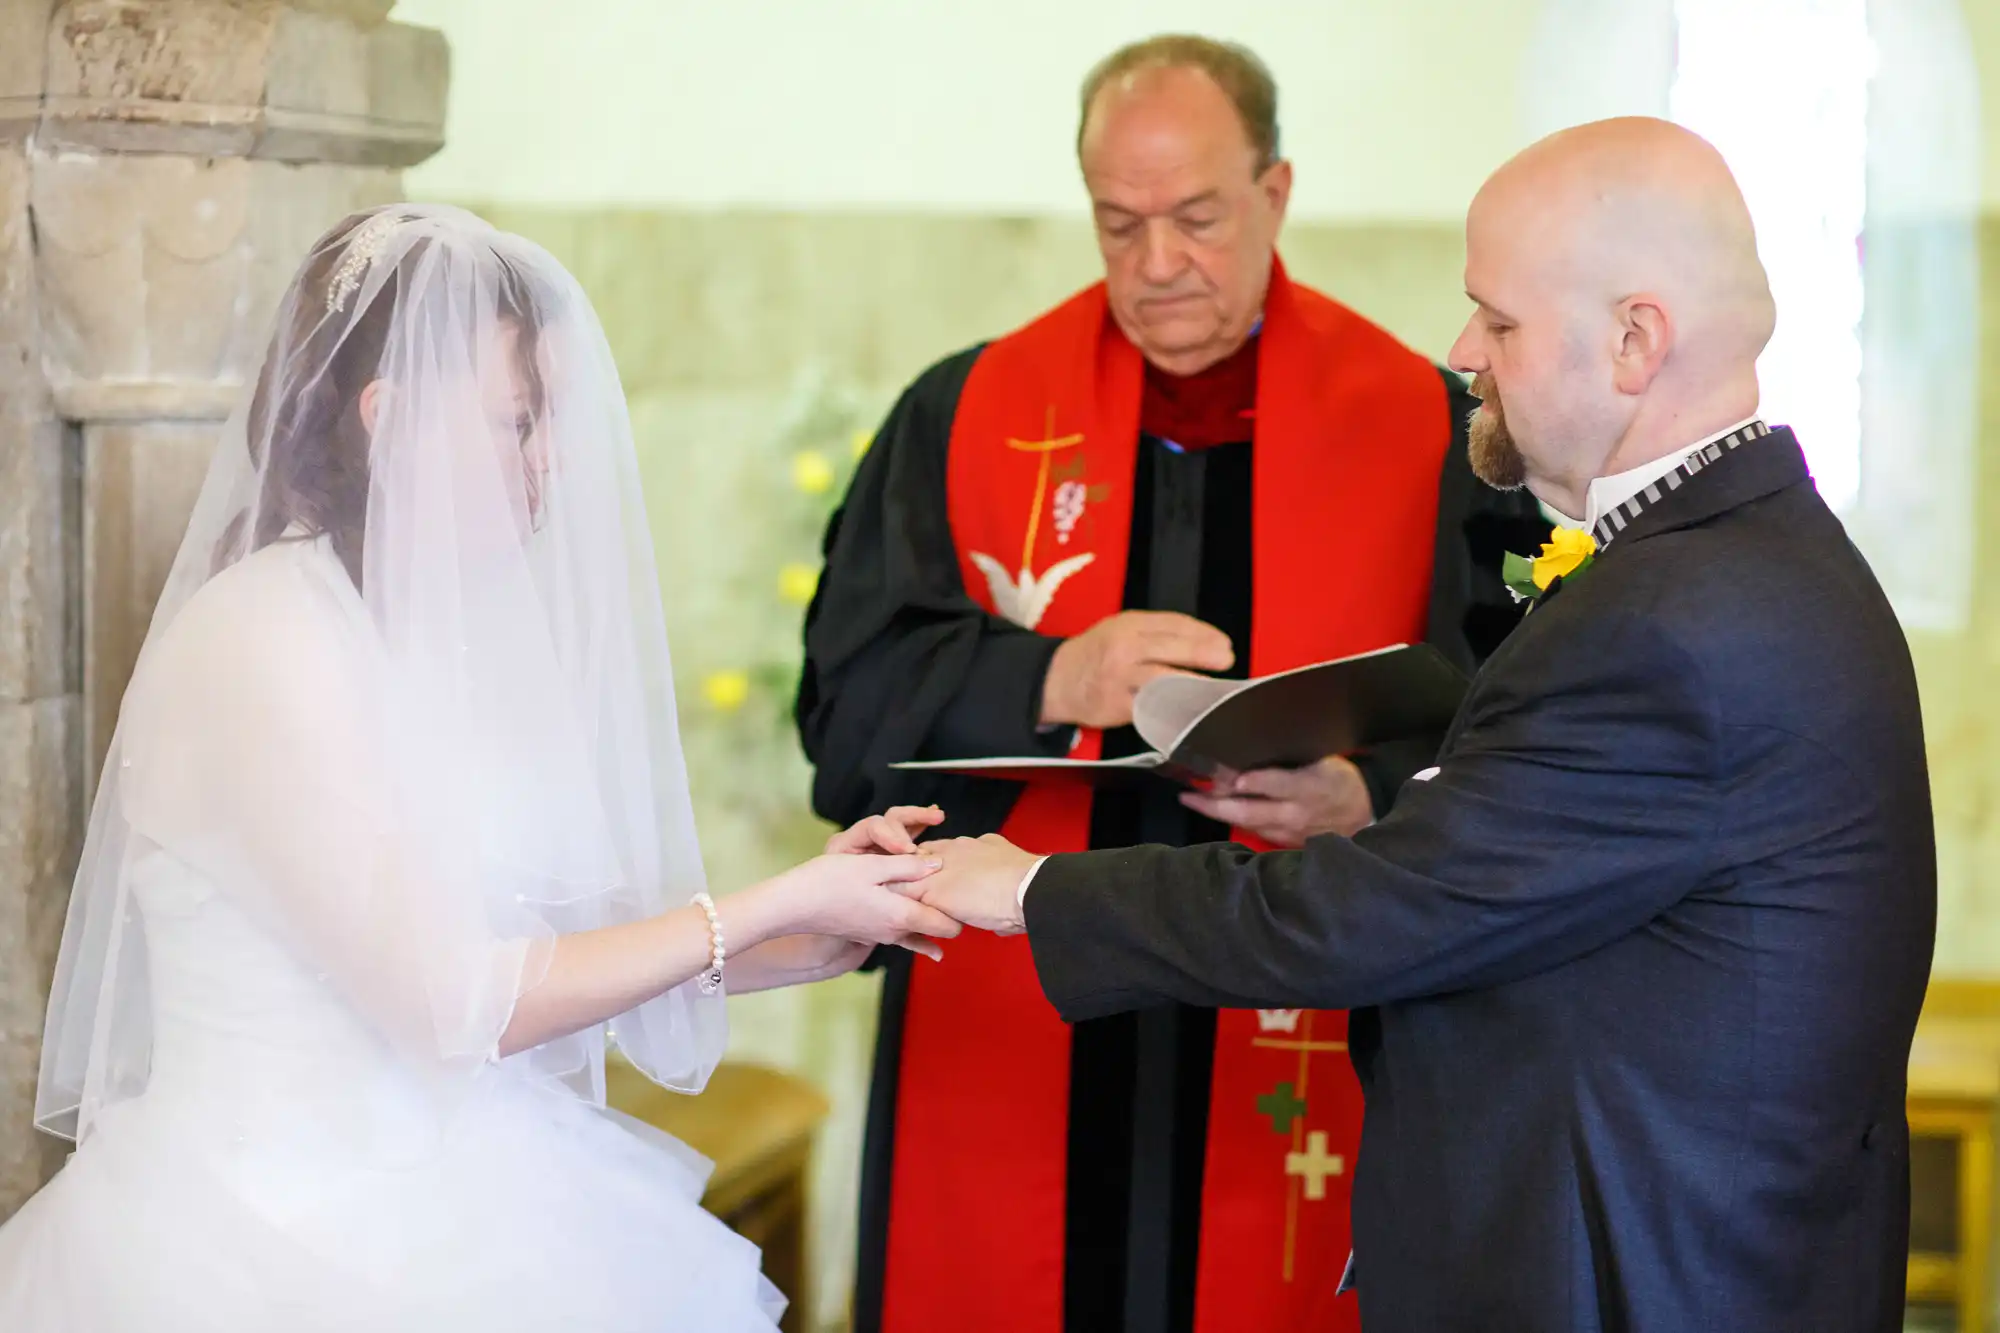 A bride and groom exchange rings during their wedding ceremony, officiated by a priest in a red robe, inside a church.